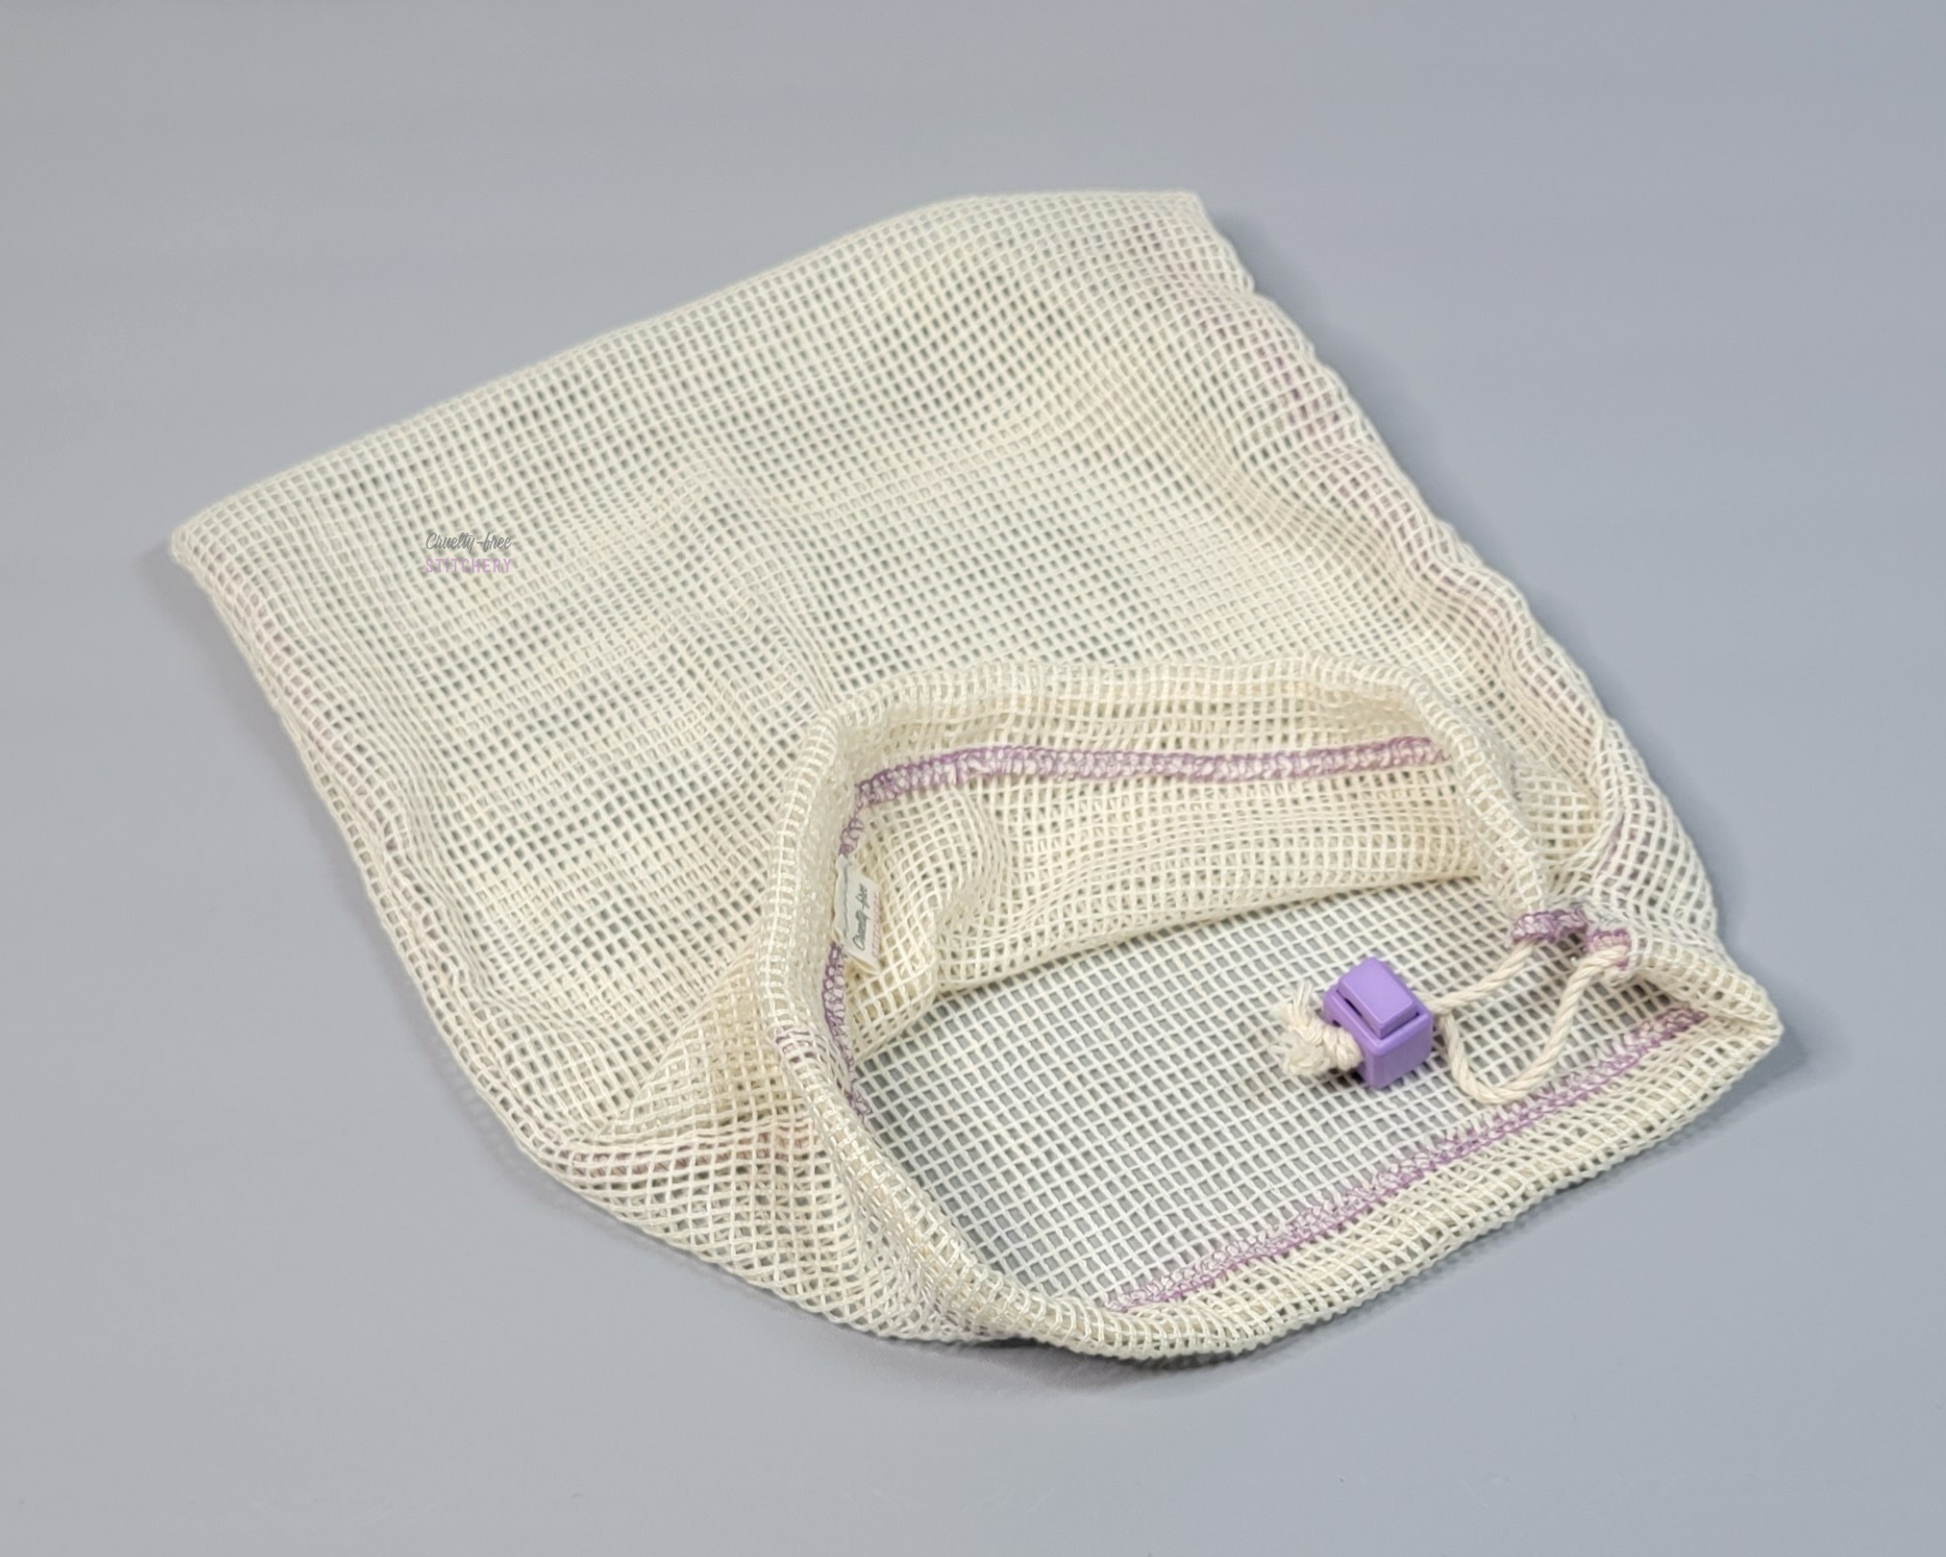 An off-white cotton mesh bag. Drawstring closure with a light purple square cord stop.